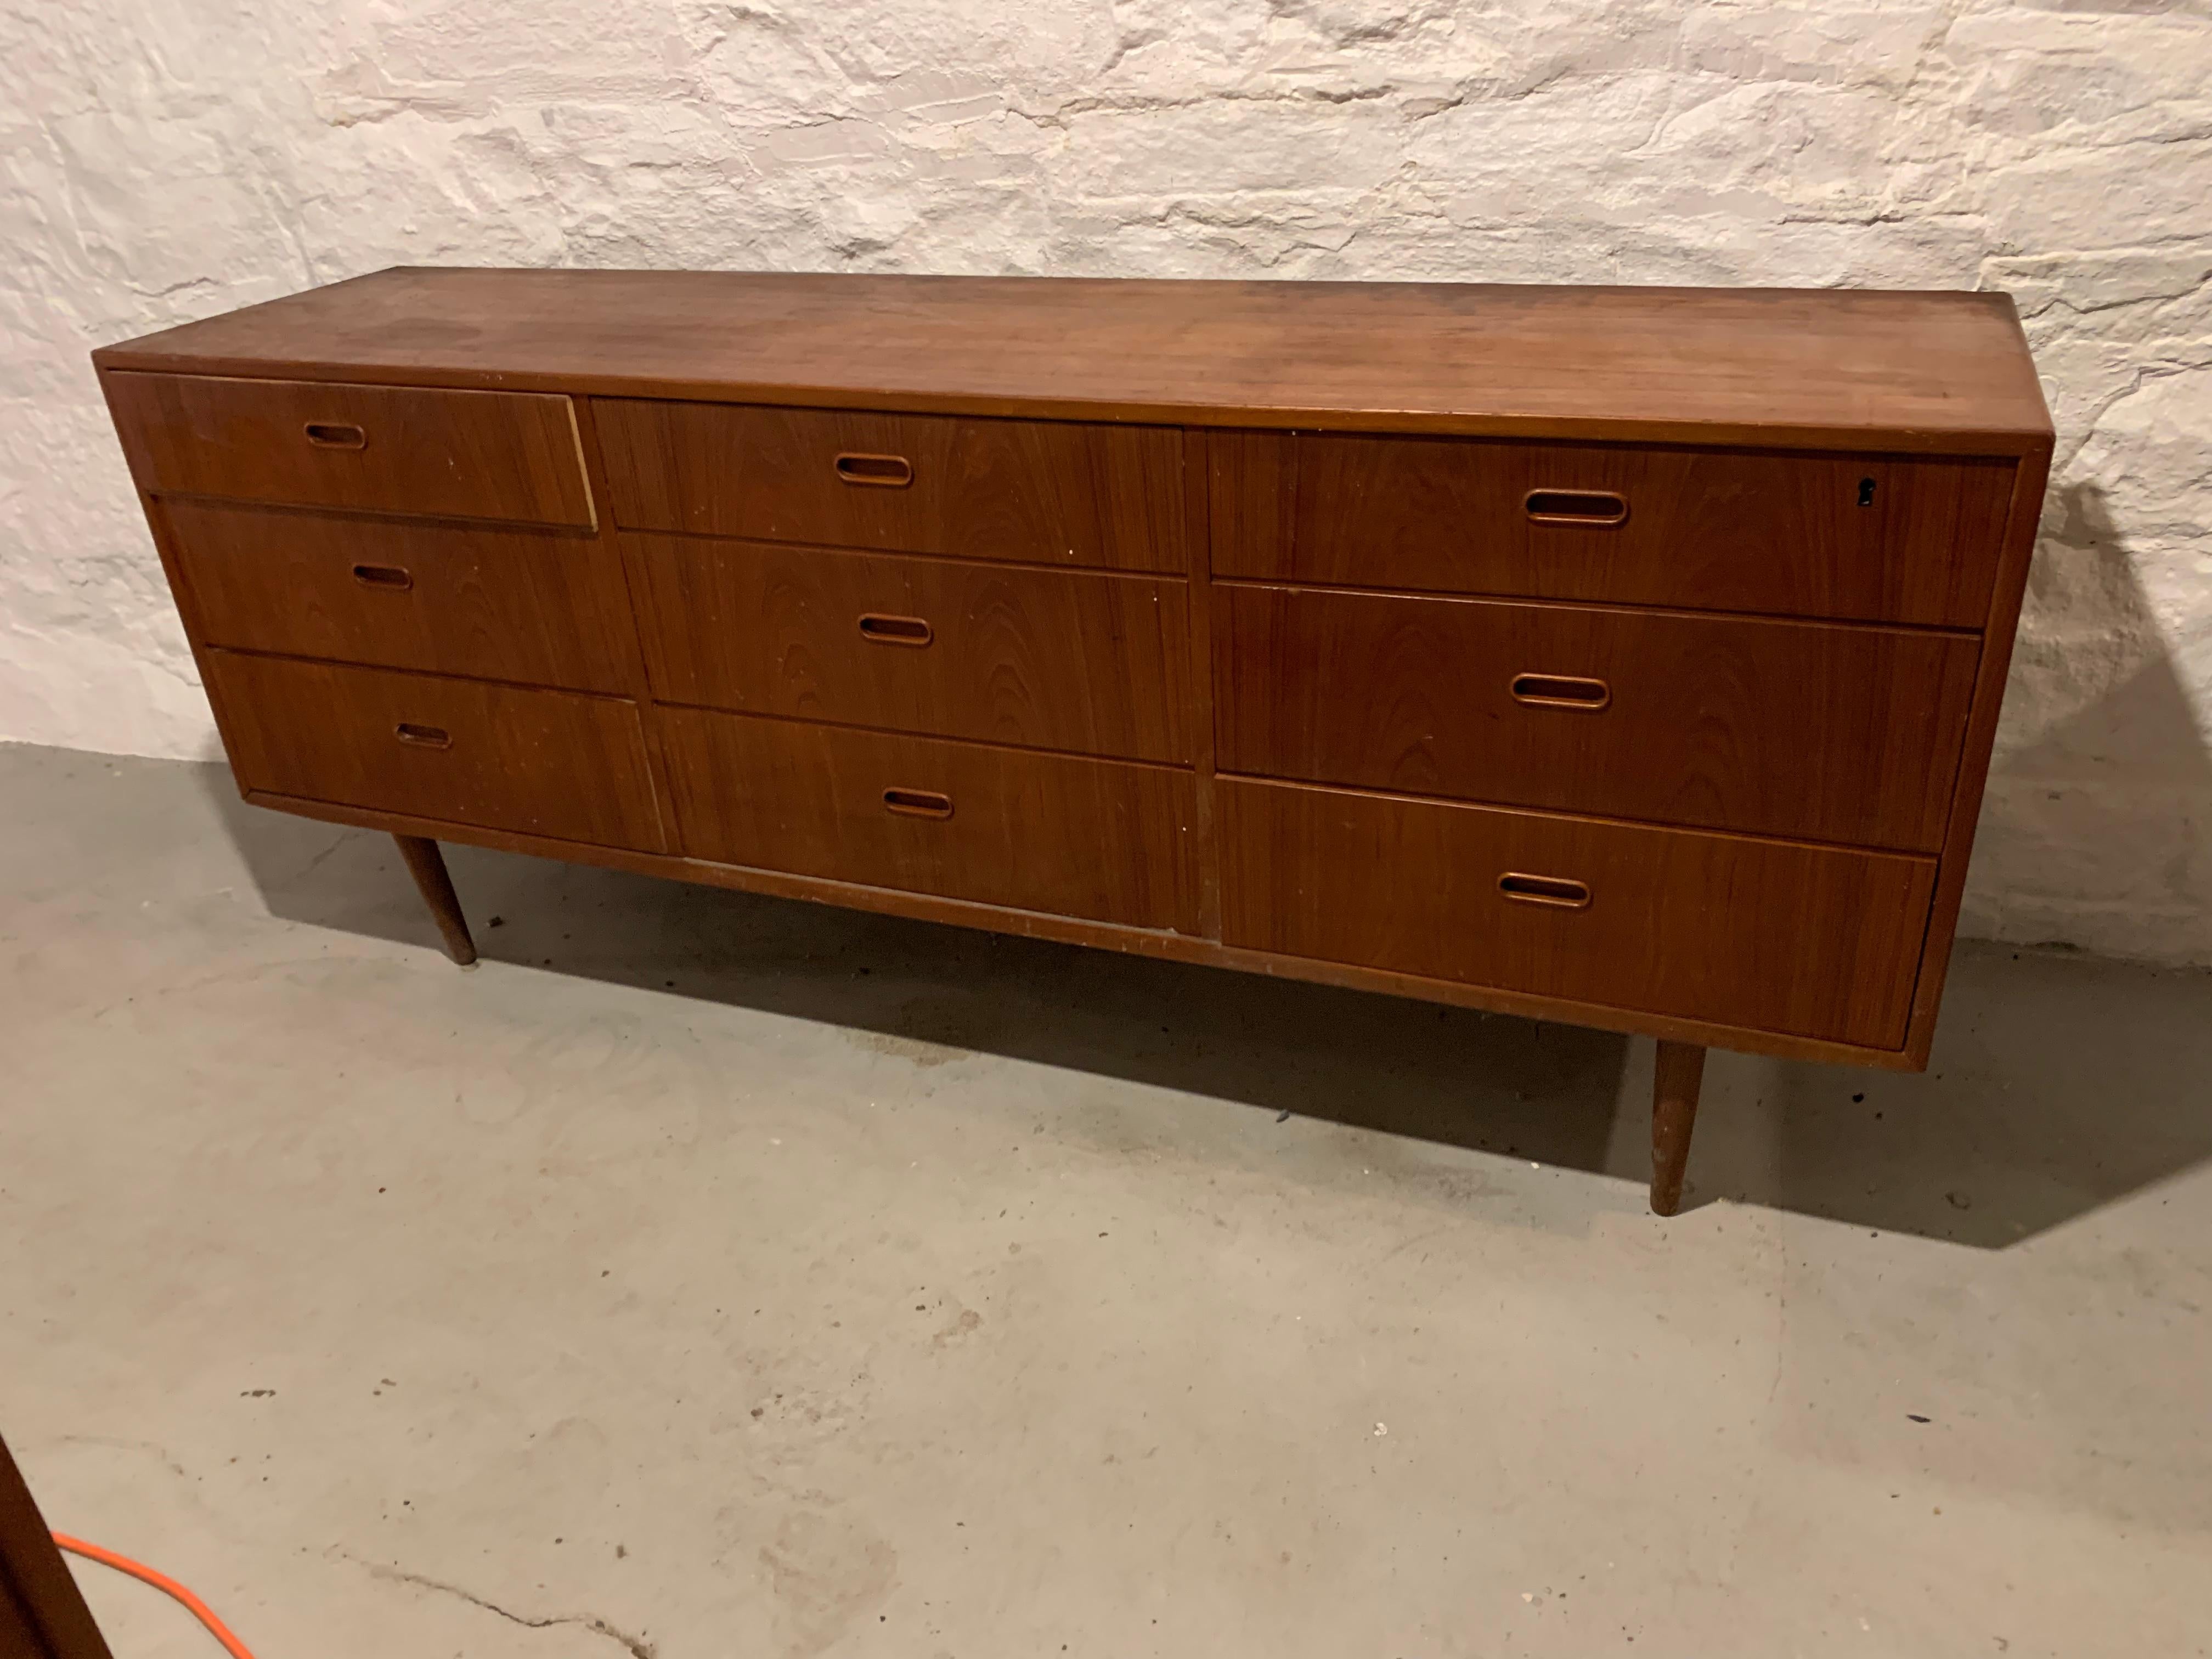 This low dresser by Falster Møbelfabrik comprises a lovely teak case - Its nine dovetailed drawers, one of which has a shallow sliding tray, feature recessed pulls in the organic style of Danish modernism.

Falster 9 drawer 72 W 18 D 31 H legs 9